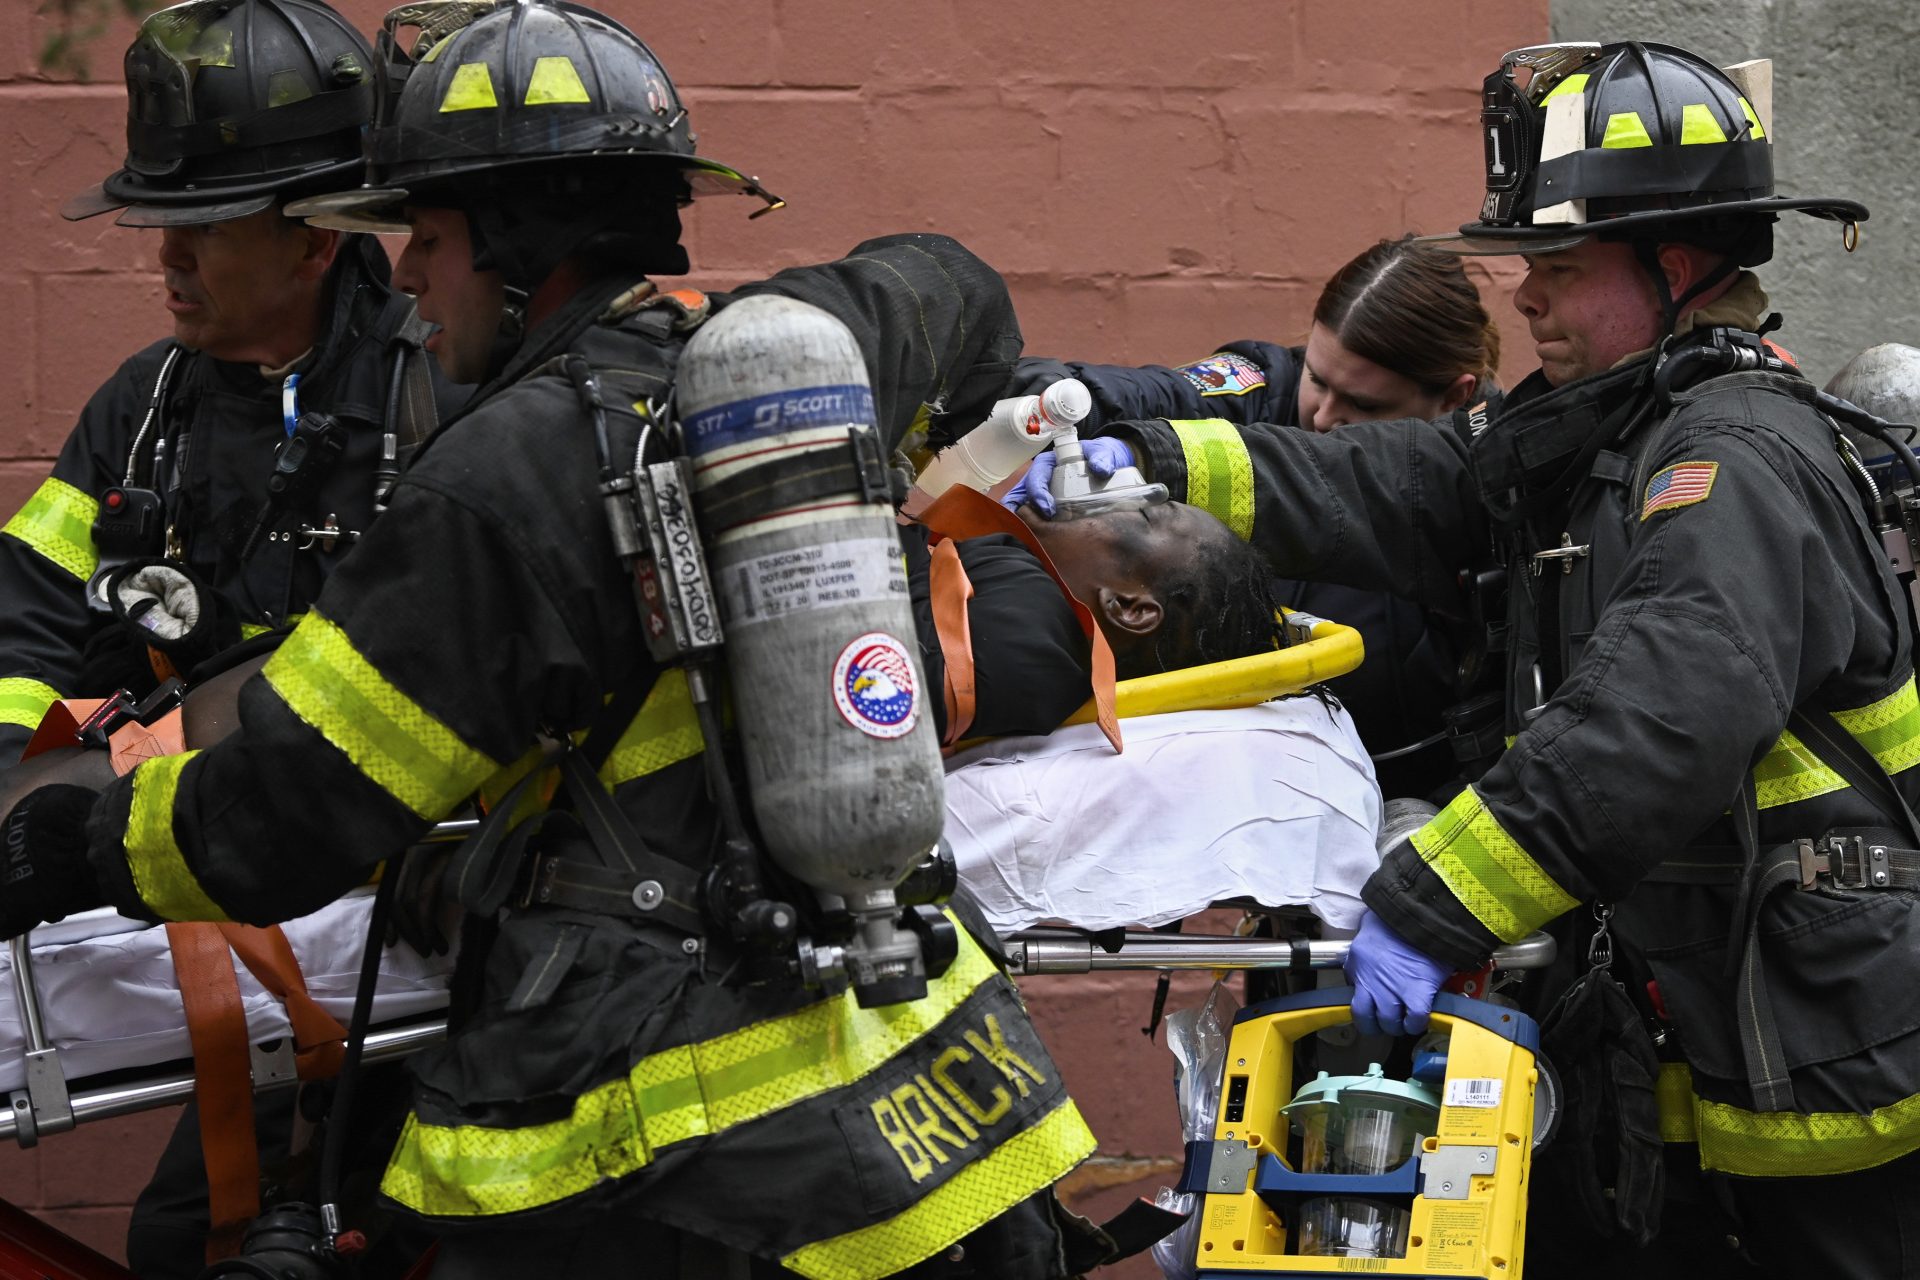 Emergency personnel use a manual resuscitator on a fire victim during a high rise fire on East 181 Street, Sunday, Jan. 9, 2022, in the Bronx borough of New York.